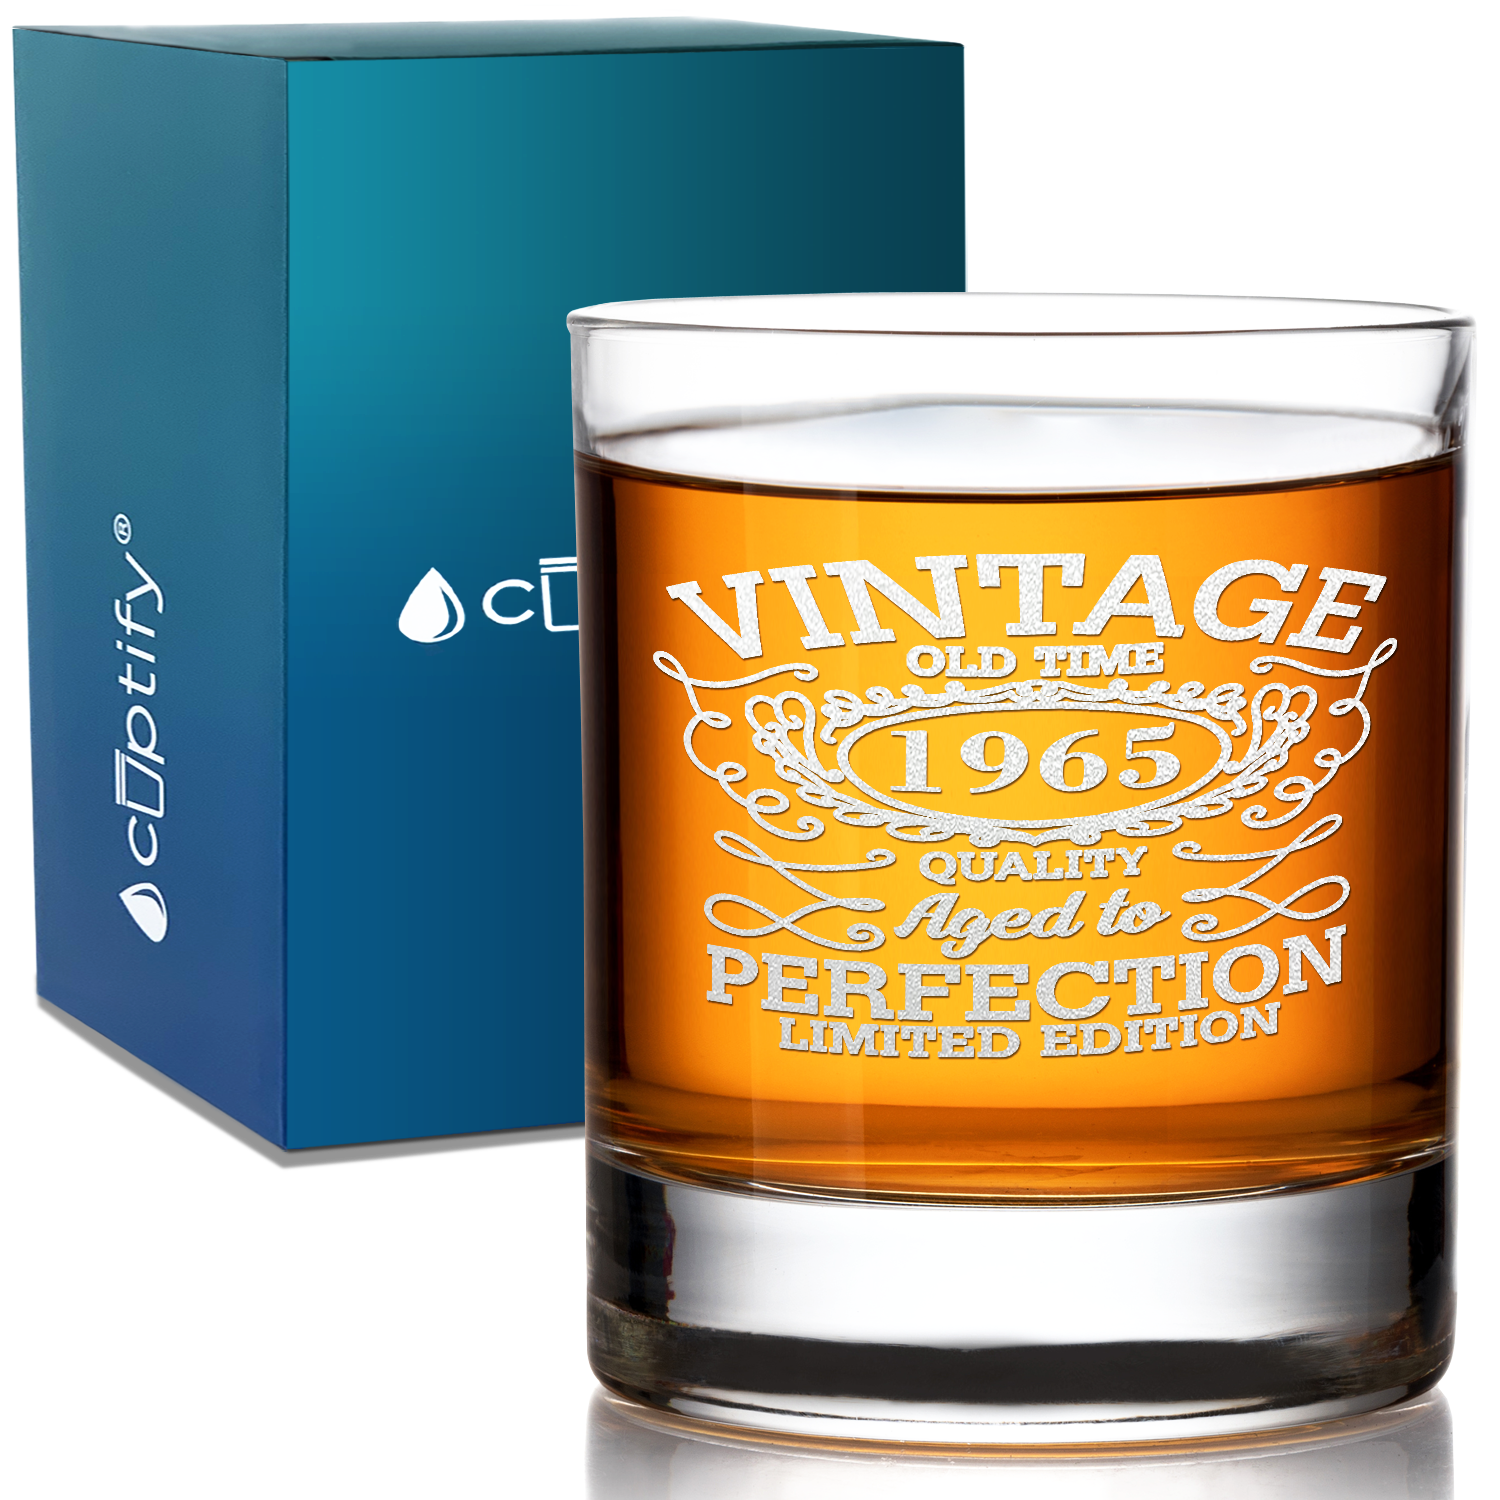 56th Birthday Vintage 56 Years Old Time 1965 Quality Laser Engraved 10.25oz Old Fashion Glass